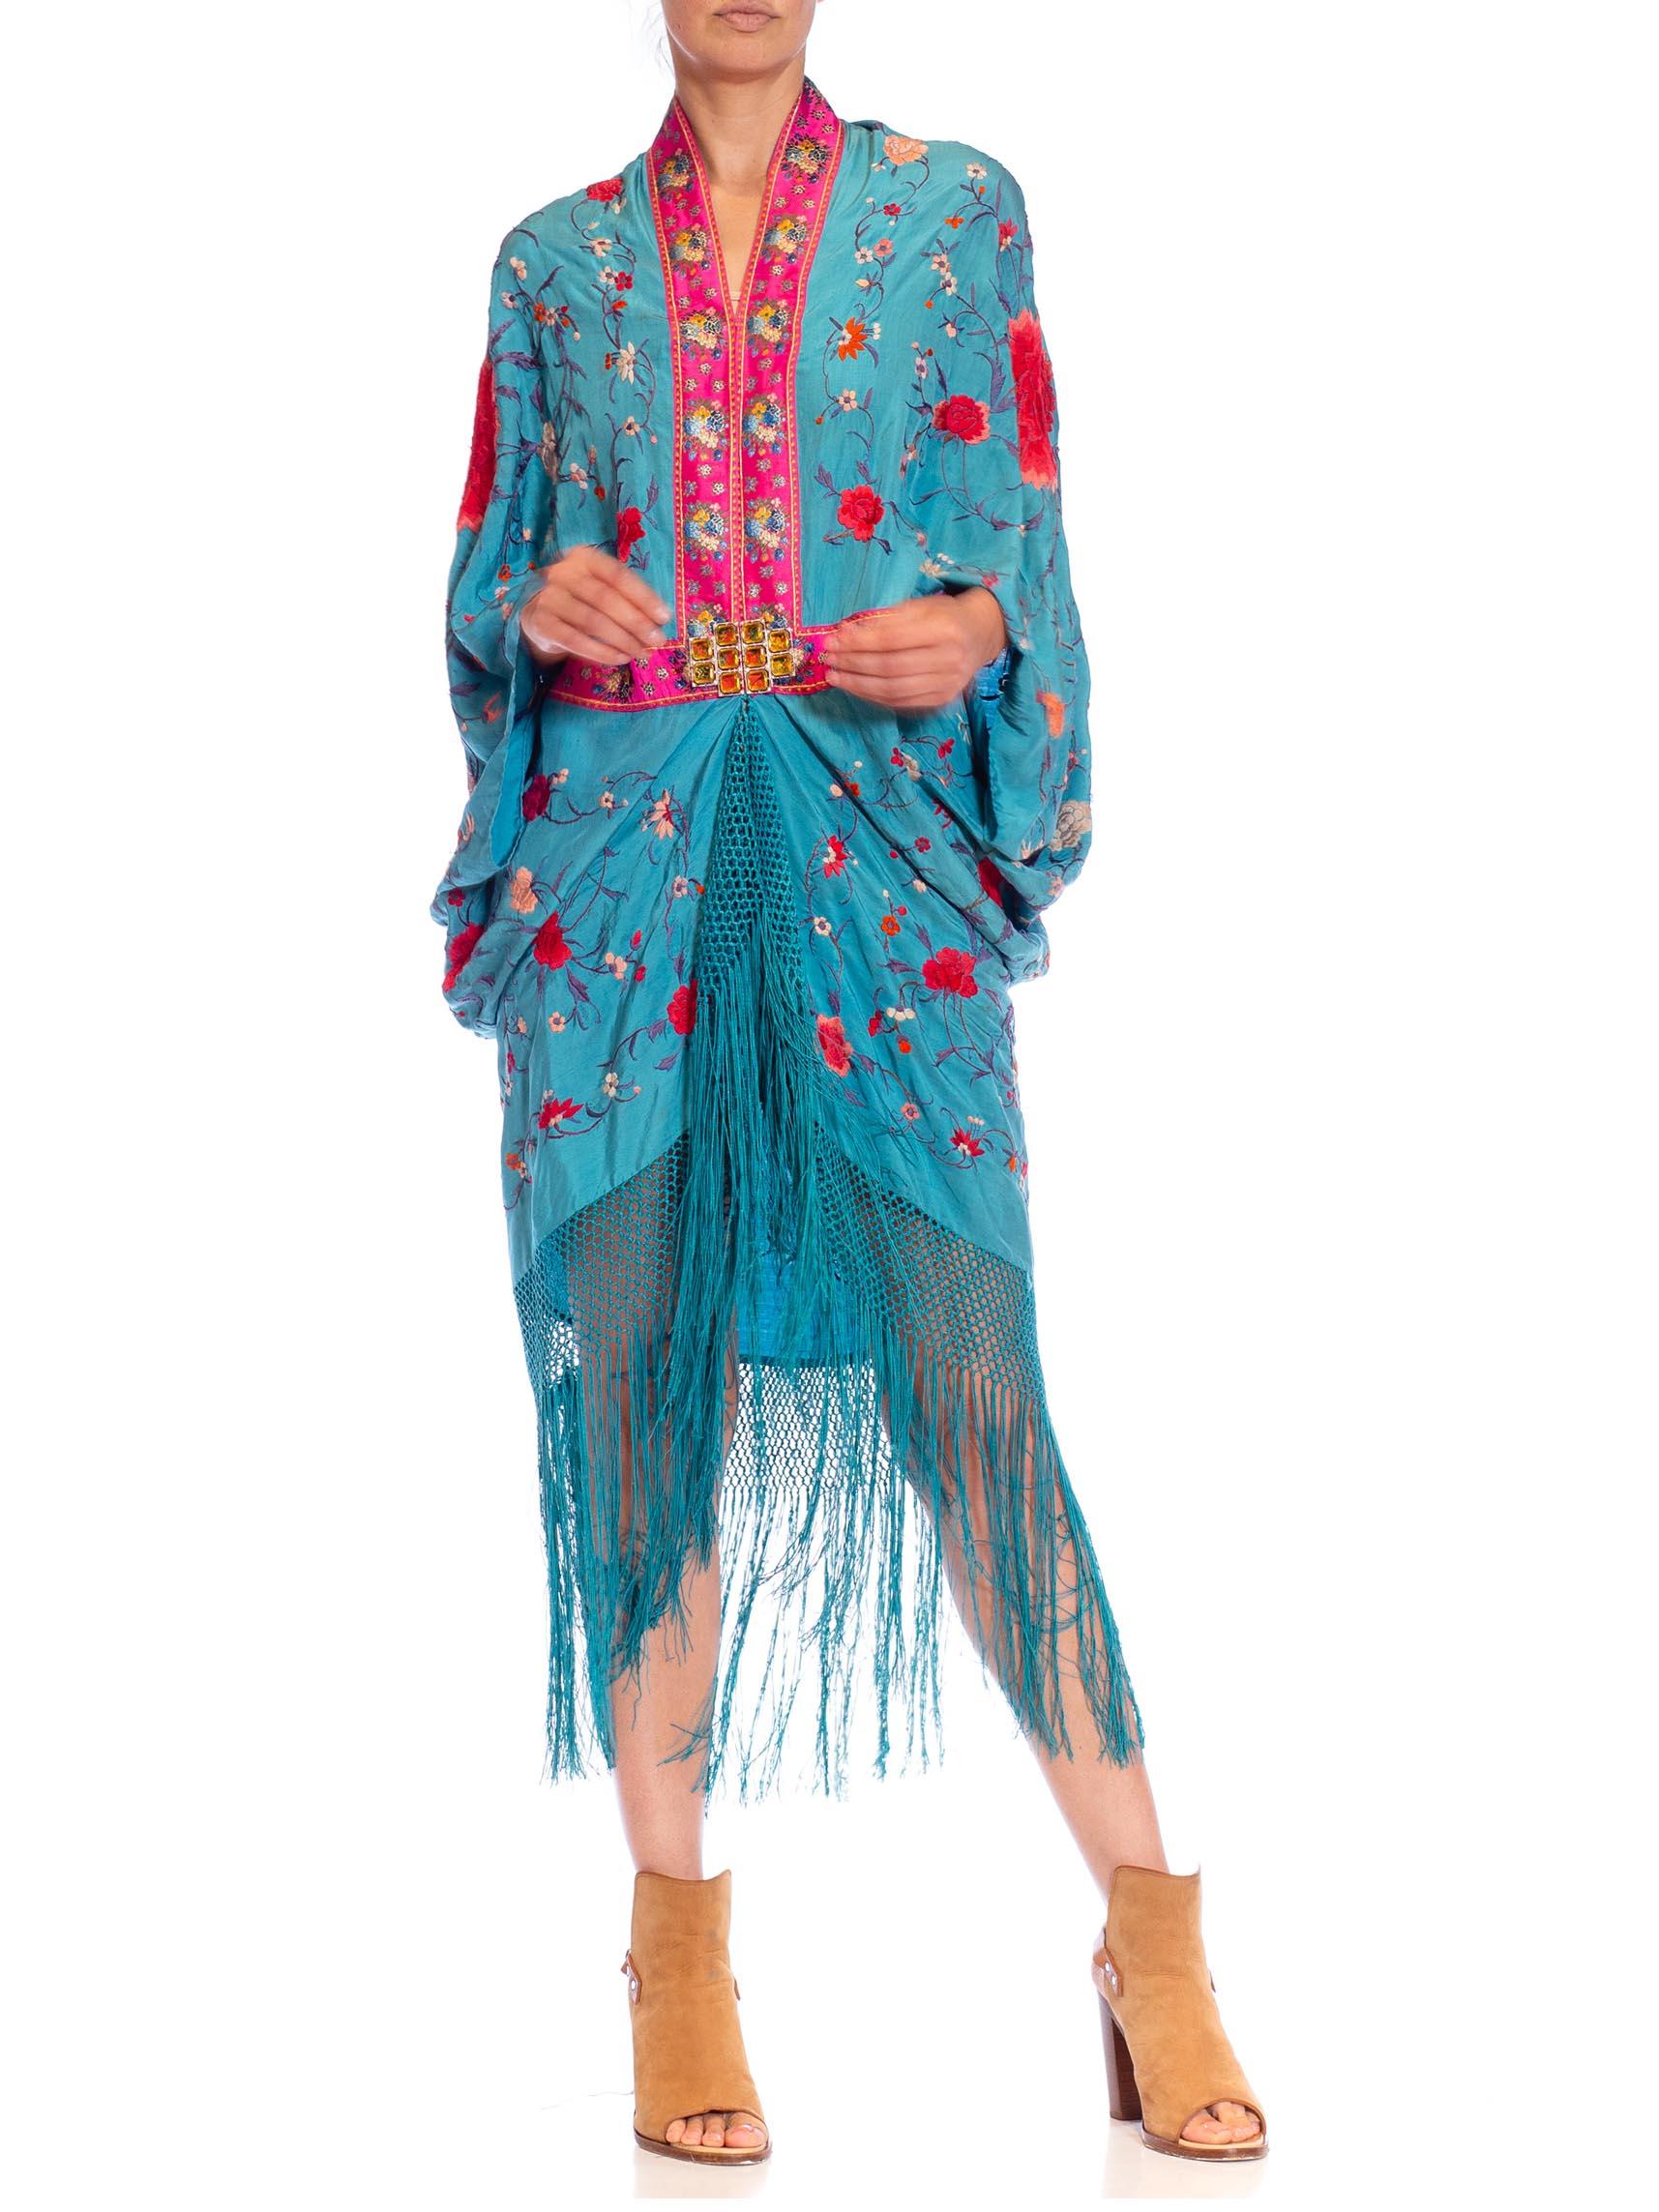 MORPHEW COLLECTION Aqua Blue & Pink Silk Embroidered Floral Cocoon With Fringe  For Sale 3